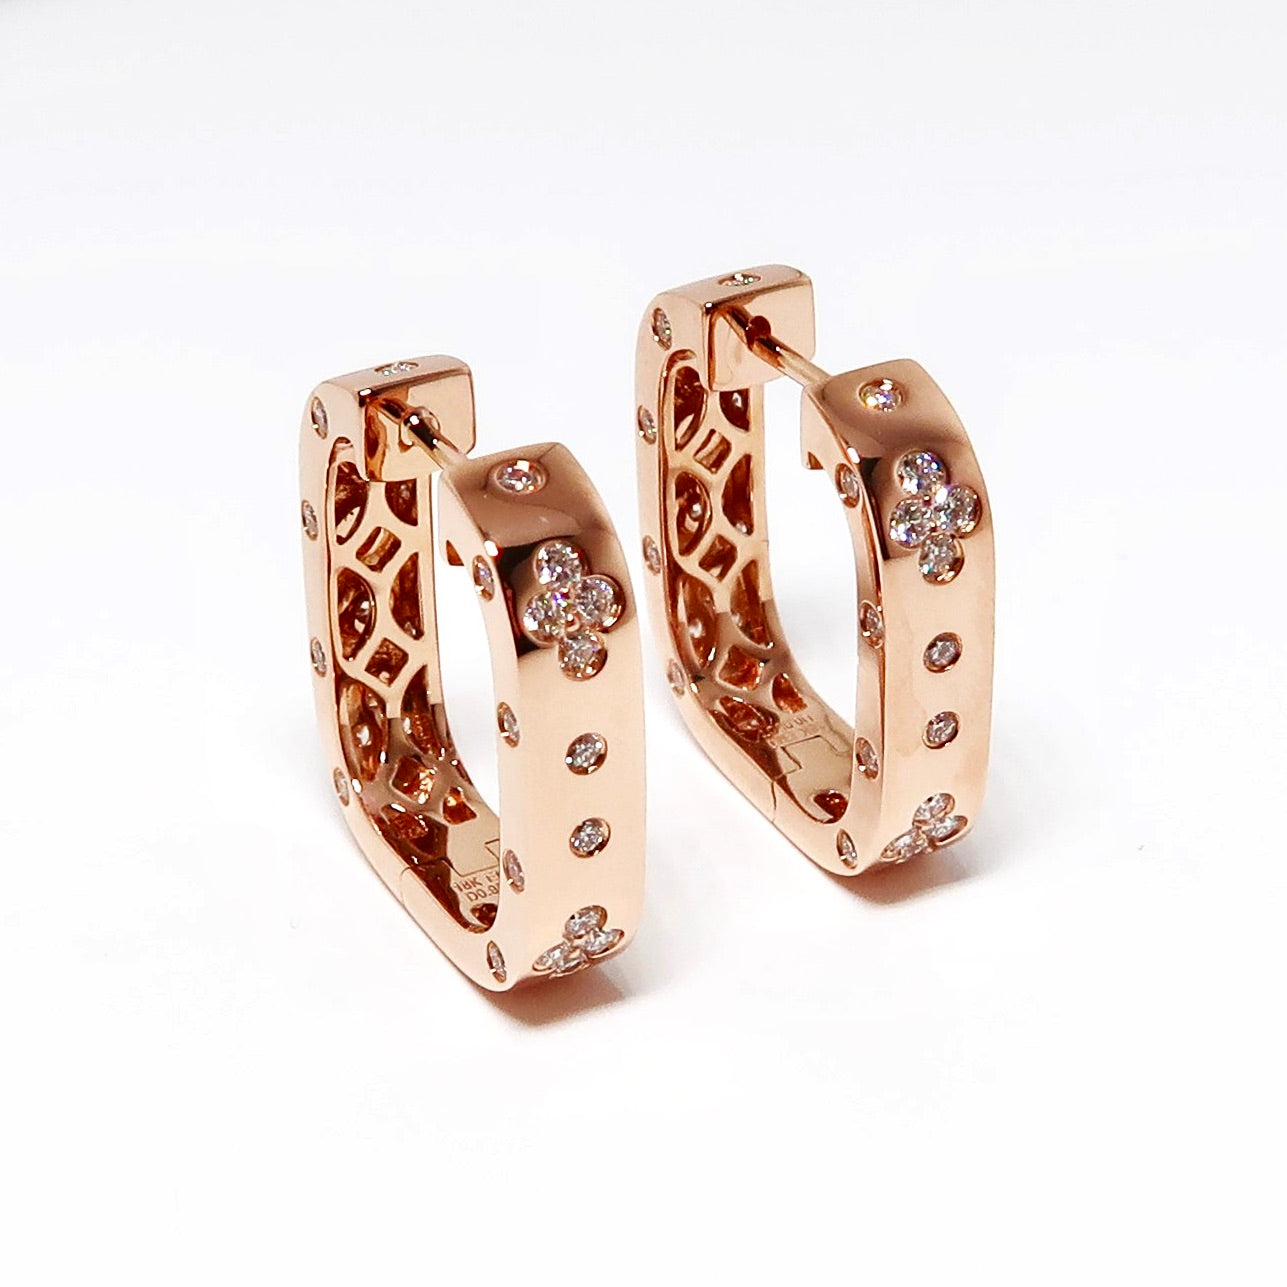 18k Rose Gold Square Design Narrow Earrings with Diamonds